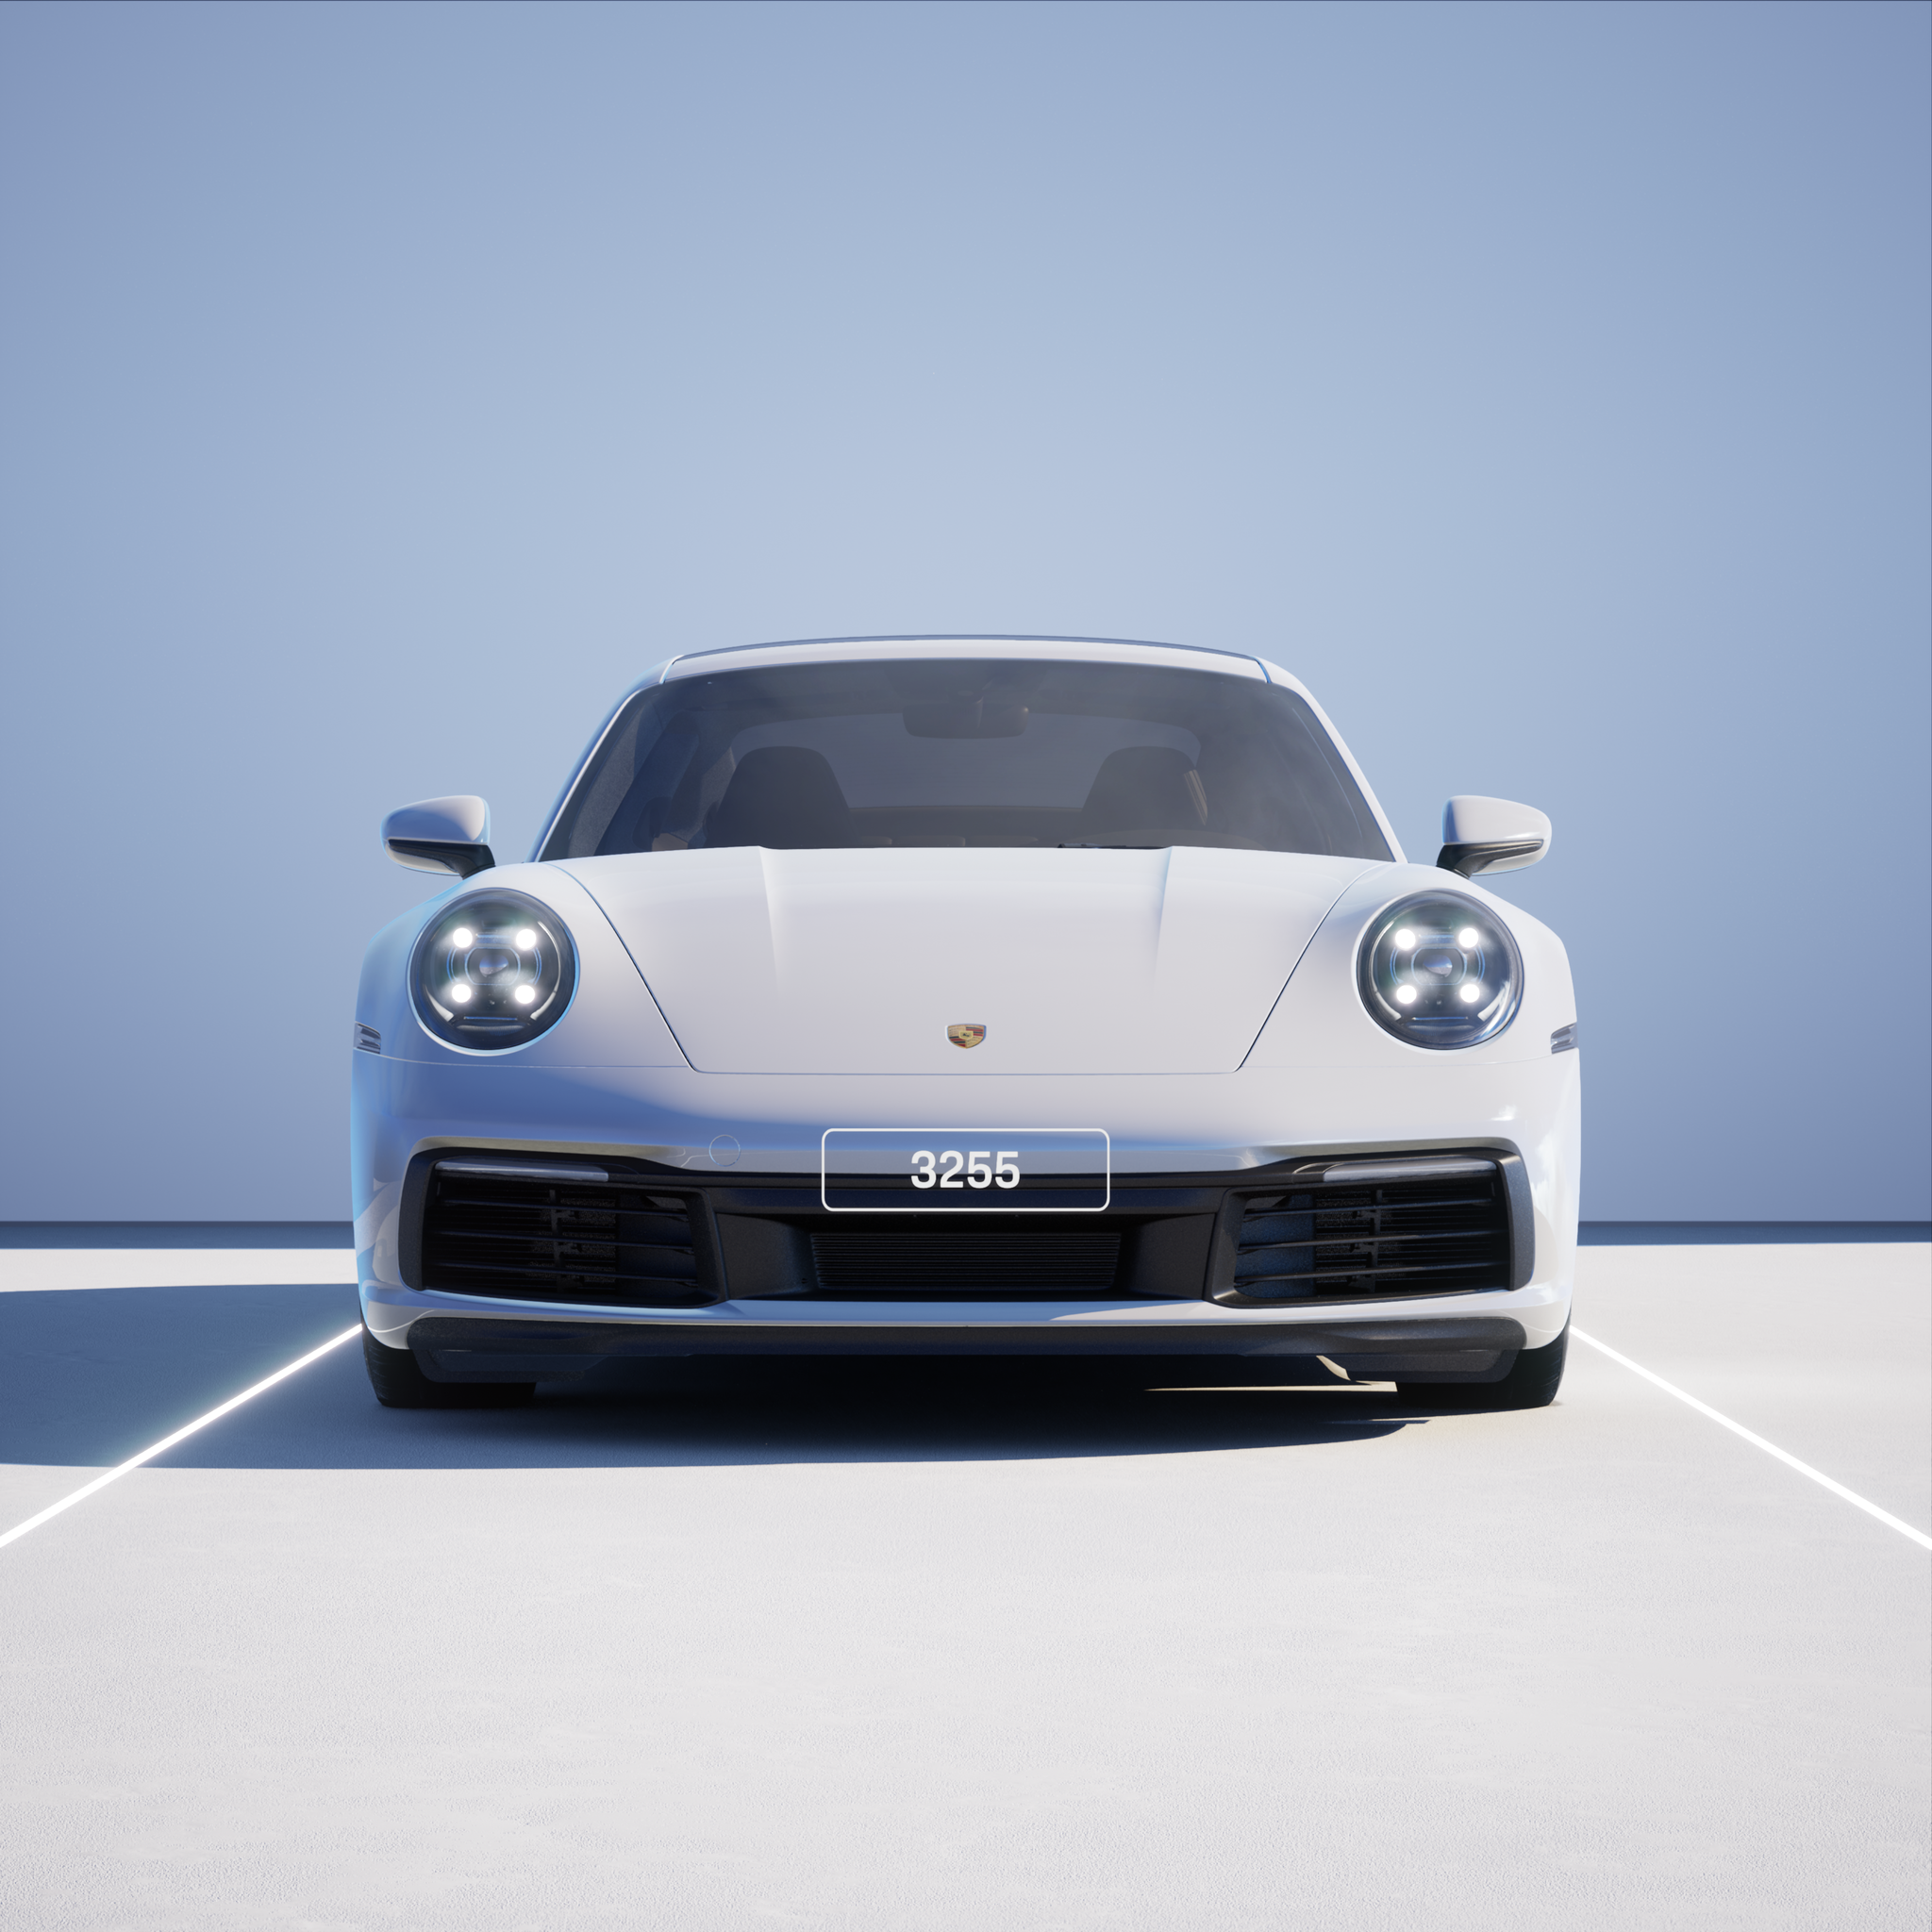 The PORSCHΞ 911 3255 image in phase